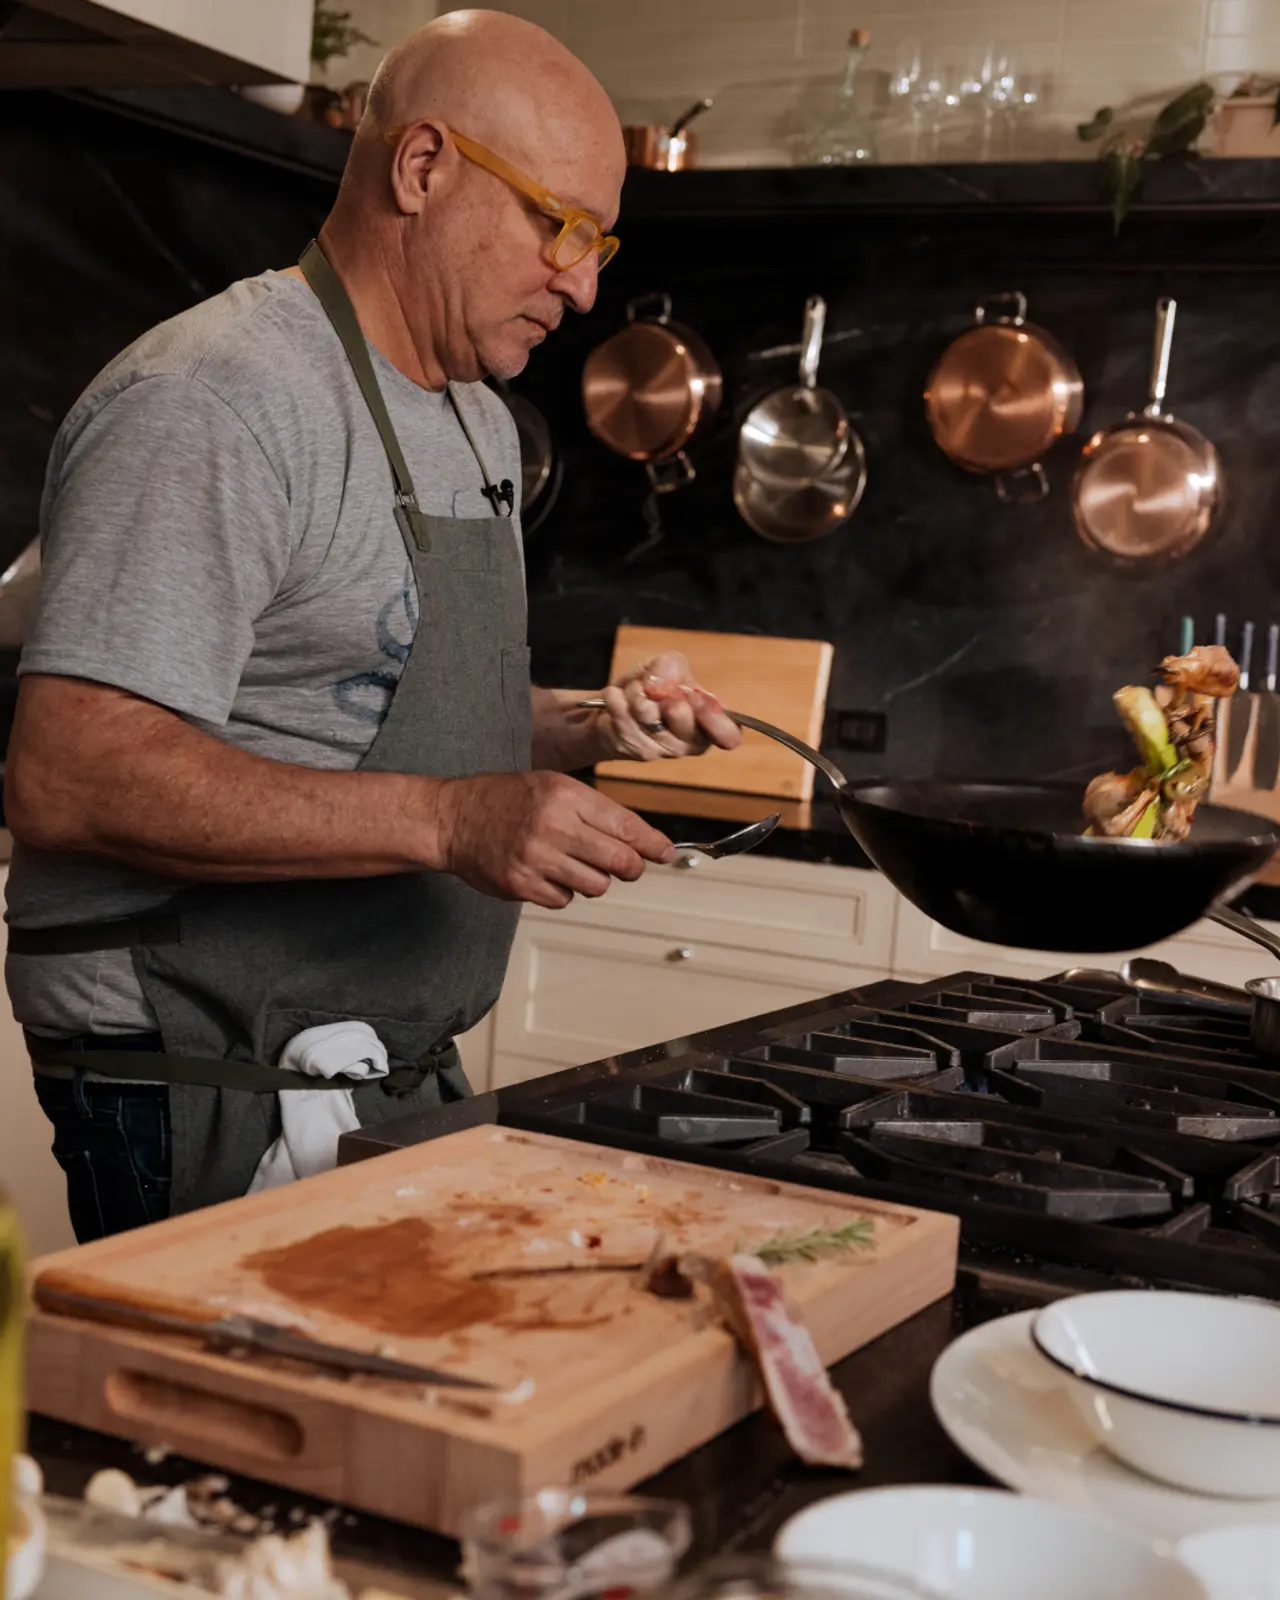 A focused chef wearing glasses and an apron sautés vegetables in a pan in a kitchen with hanging copper pots and a chopping board in the foreground.